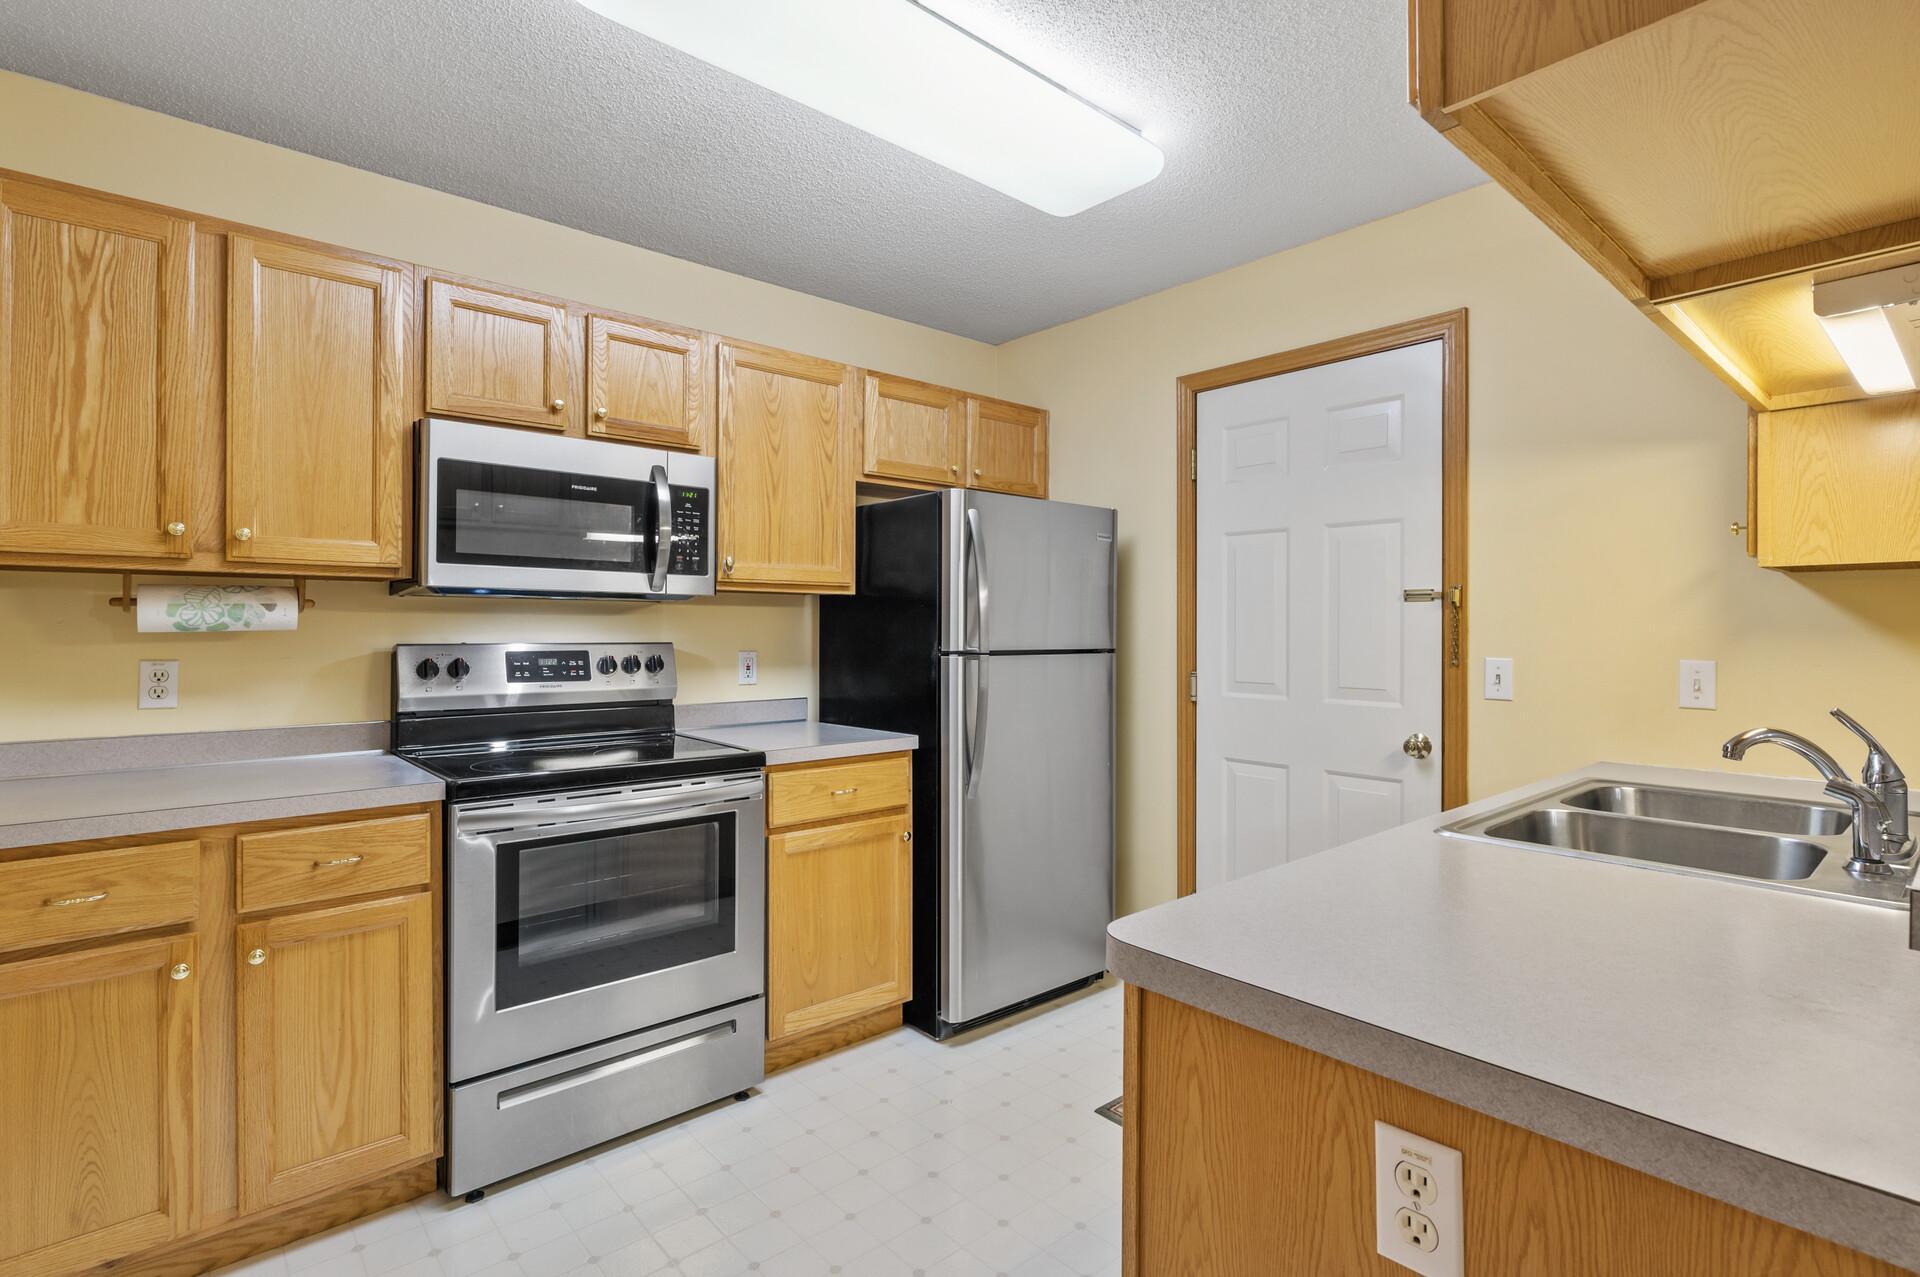 Stainless steel appliances and half bath right off the kitchen